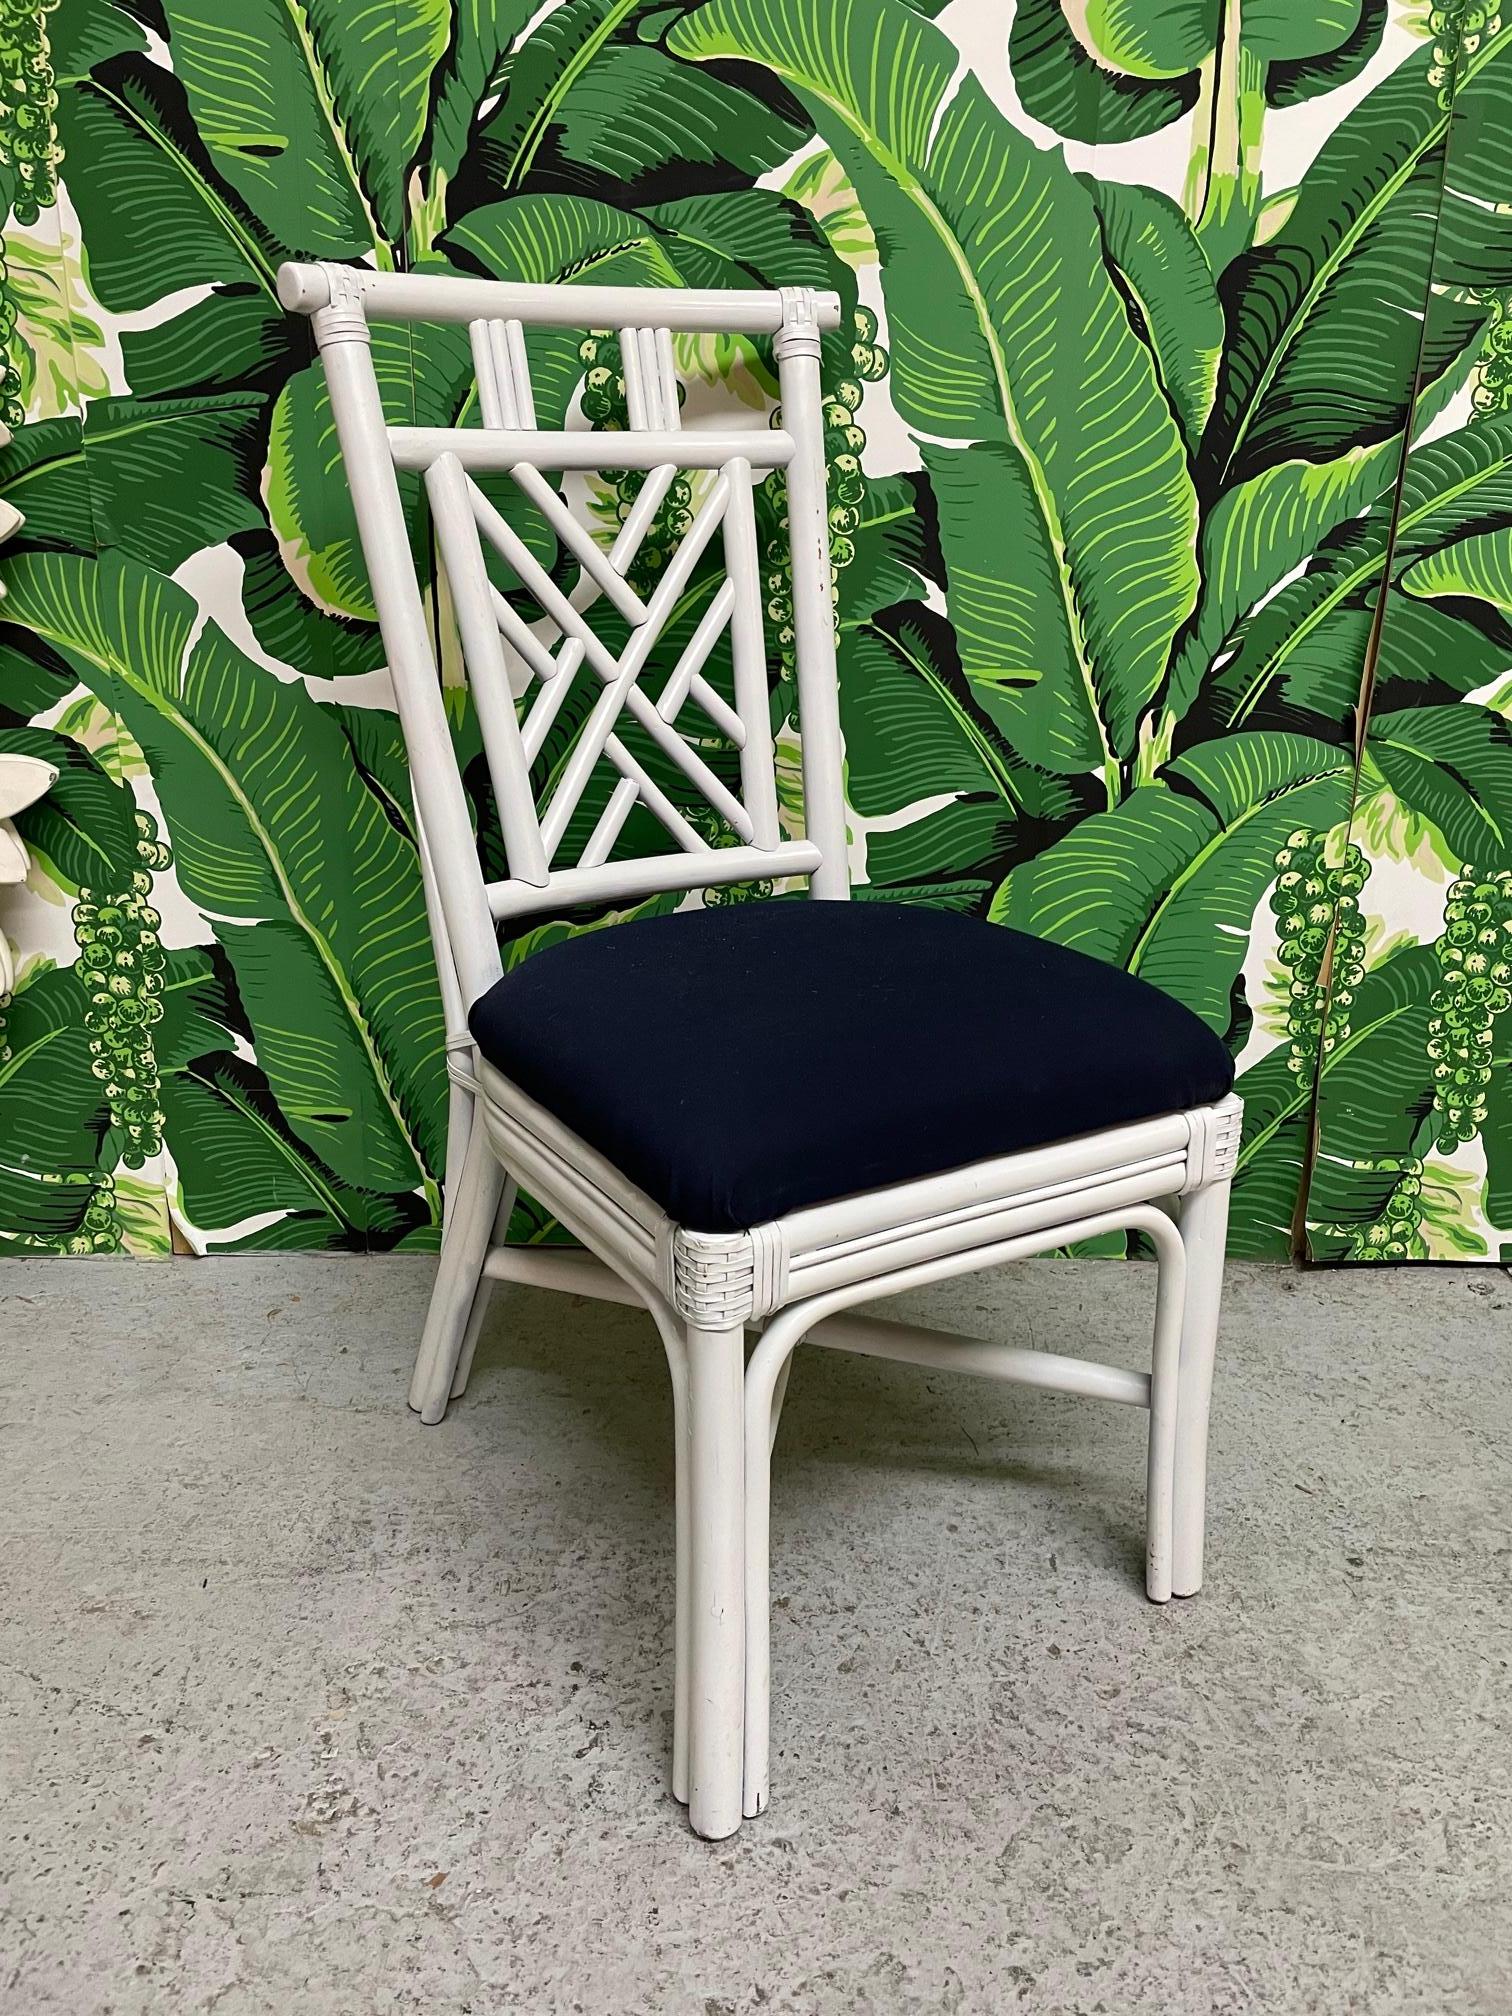 Set of ten vintage rattan dining chairs in Asian chinoiserie style. Six chairs have white upholstery and four have dark blue. Good condition with minor imperfections consistent with age.